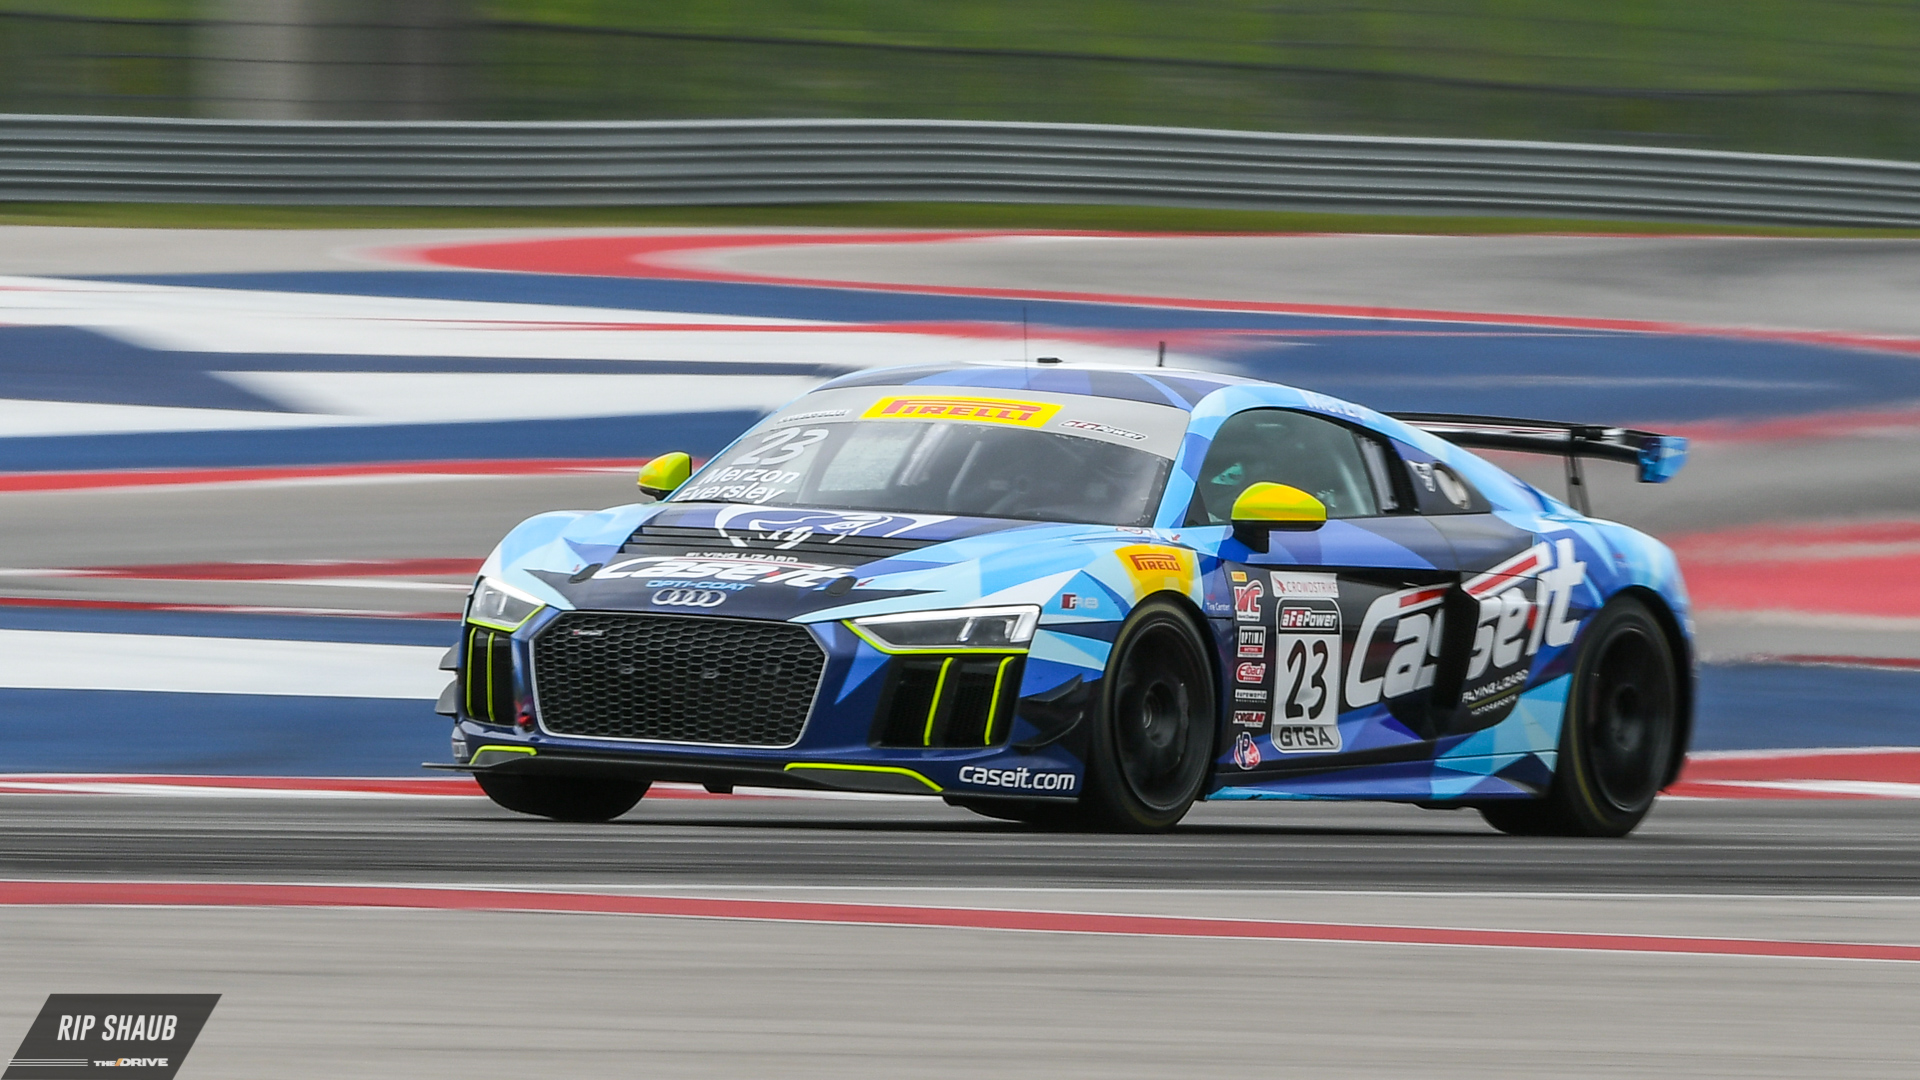 Caseit and Flying Lizard represented by Adam Merzon and Ryan Eversley Audi R8 LMS GT4, <i>© Rip Shaub - All Rights Reserved</i>